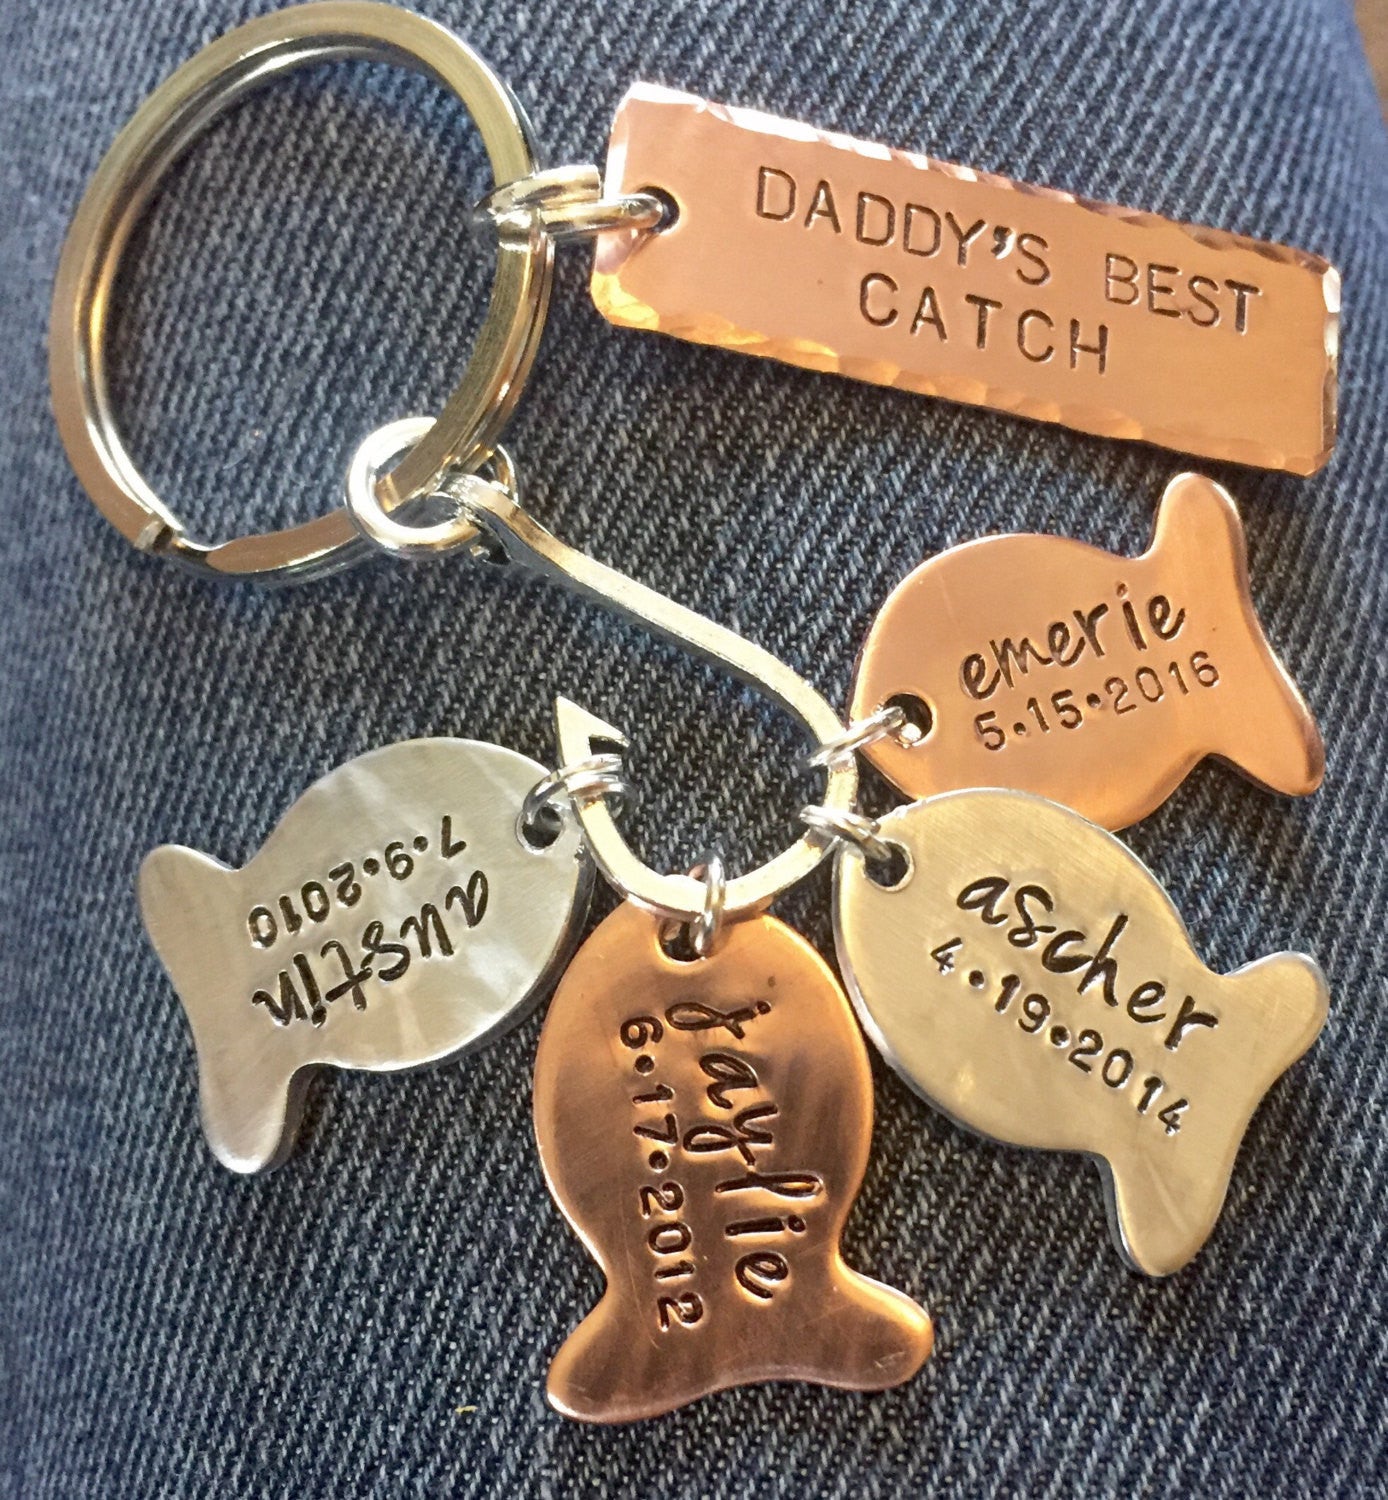 Fishing Keychain, Personalized Fishing Keychains, Hooked On Dad - Natashaaloha, jewelry, bracelets, necklace, keychains, fishing lures, gifts for men, charms, personalized, 